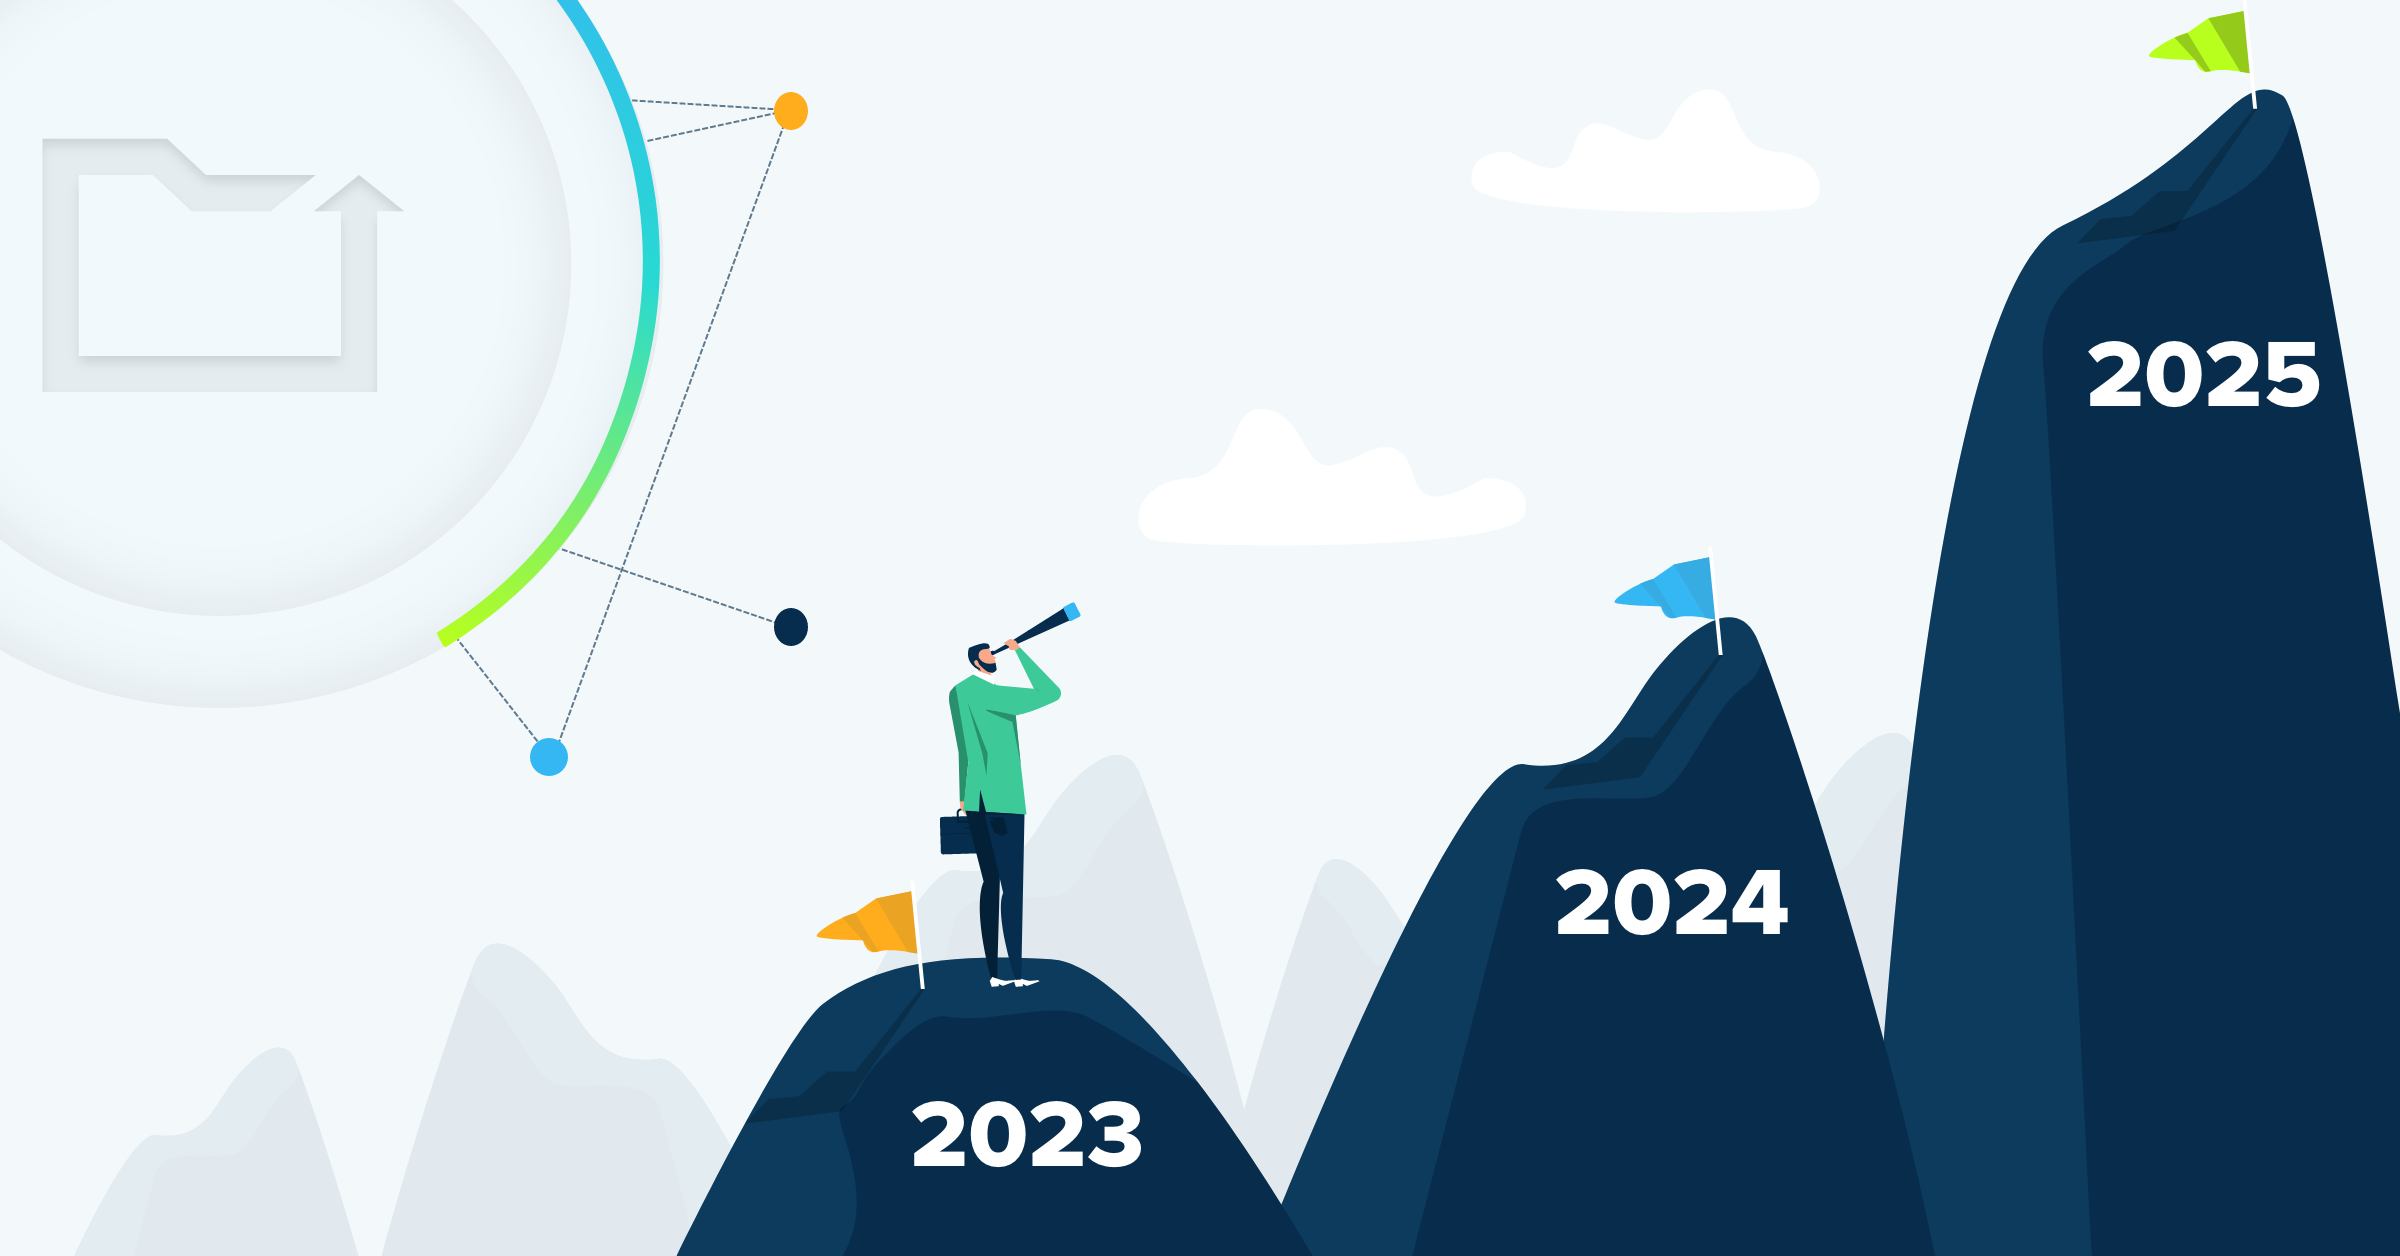 Person on '2023' mountain looks towards '2024' and '2025' peaks, representing forward planning in cybersecurity.